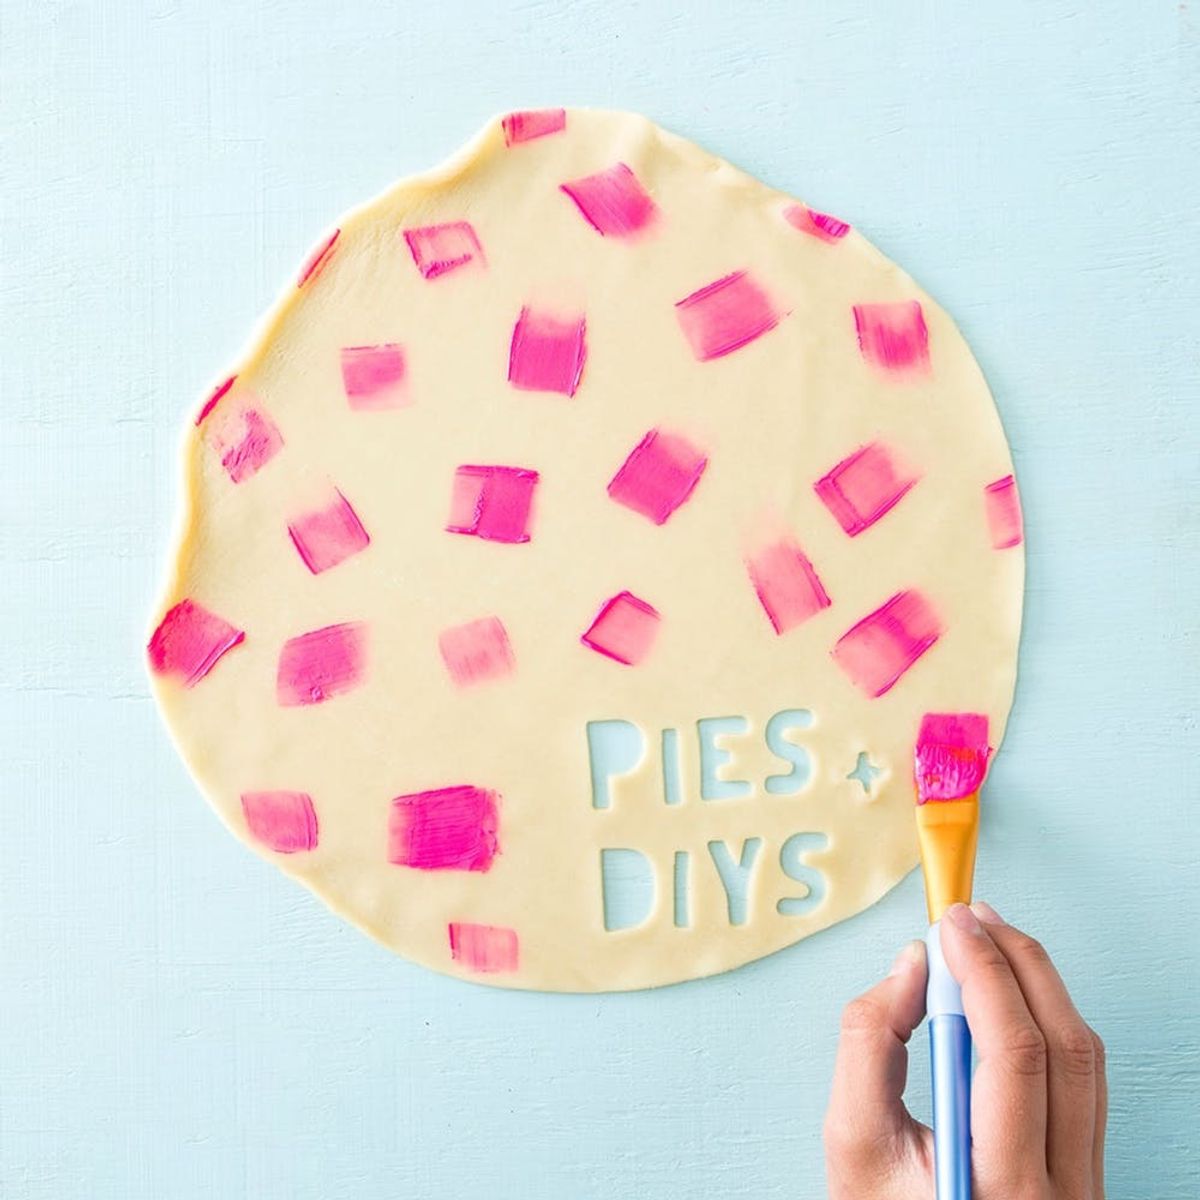 Pies and DIYs: Mother’s Day Edition